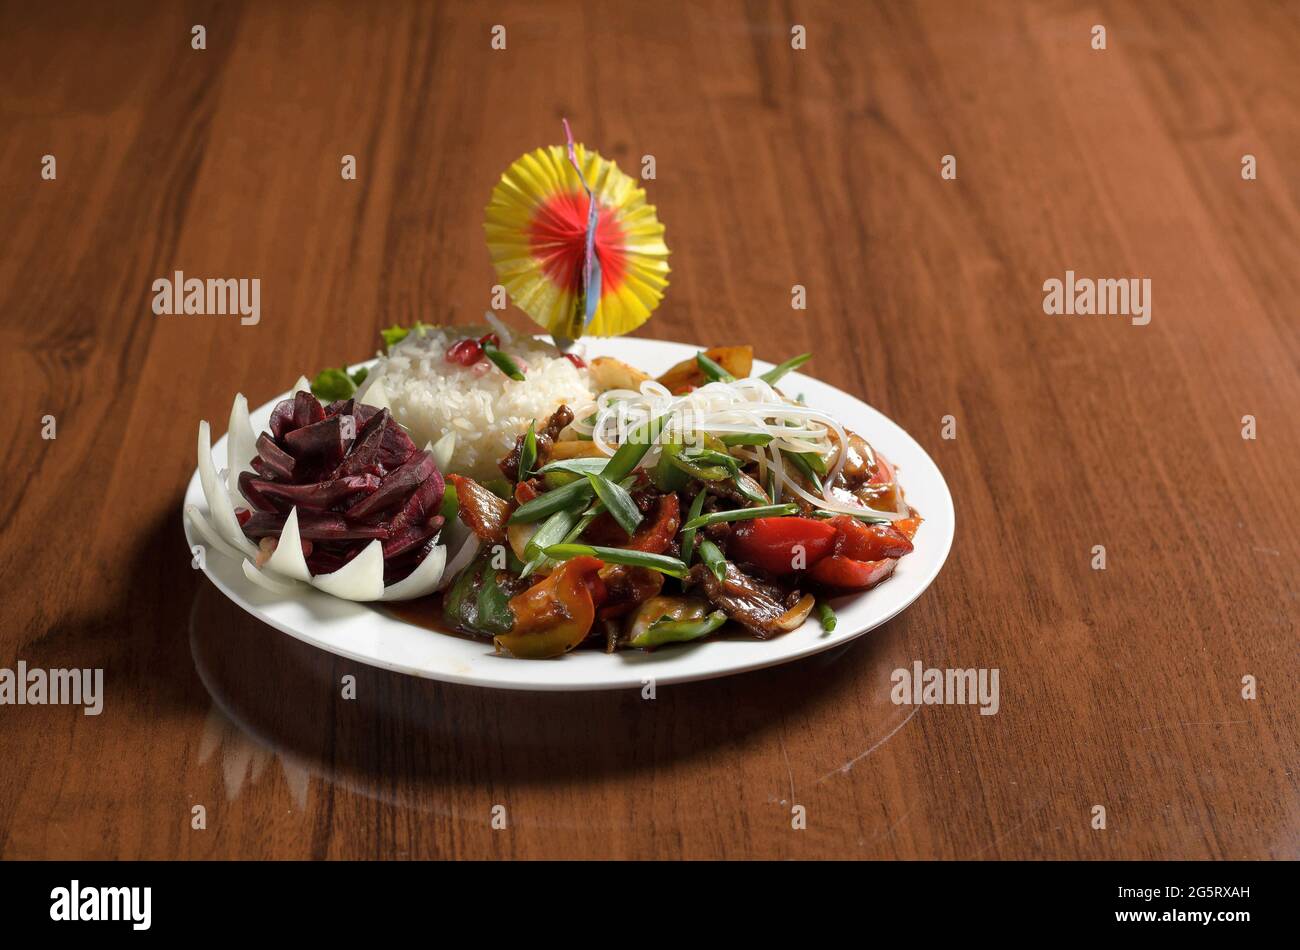 Uyghur Asian food stewed meat with vegetables, red bell pepper, tomatoes, cabbage, carrots in a white plate with rice on the table Stock Photo